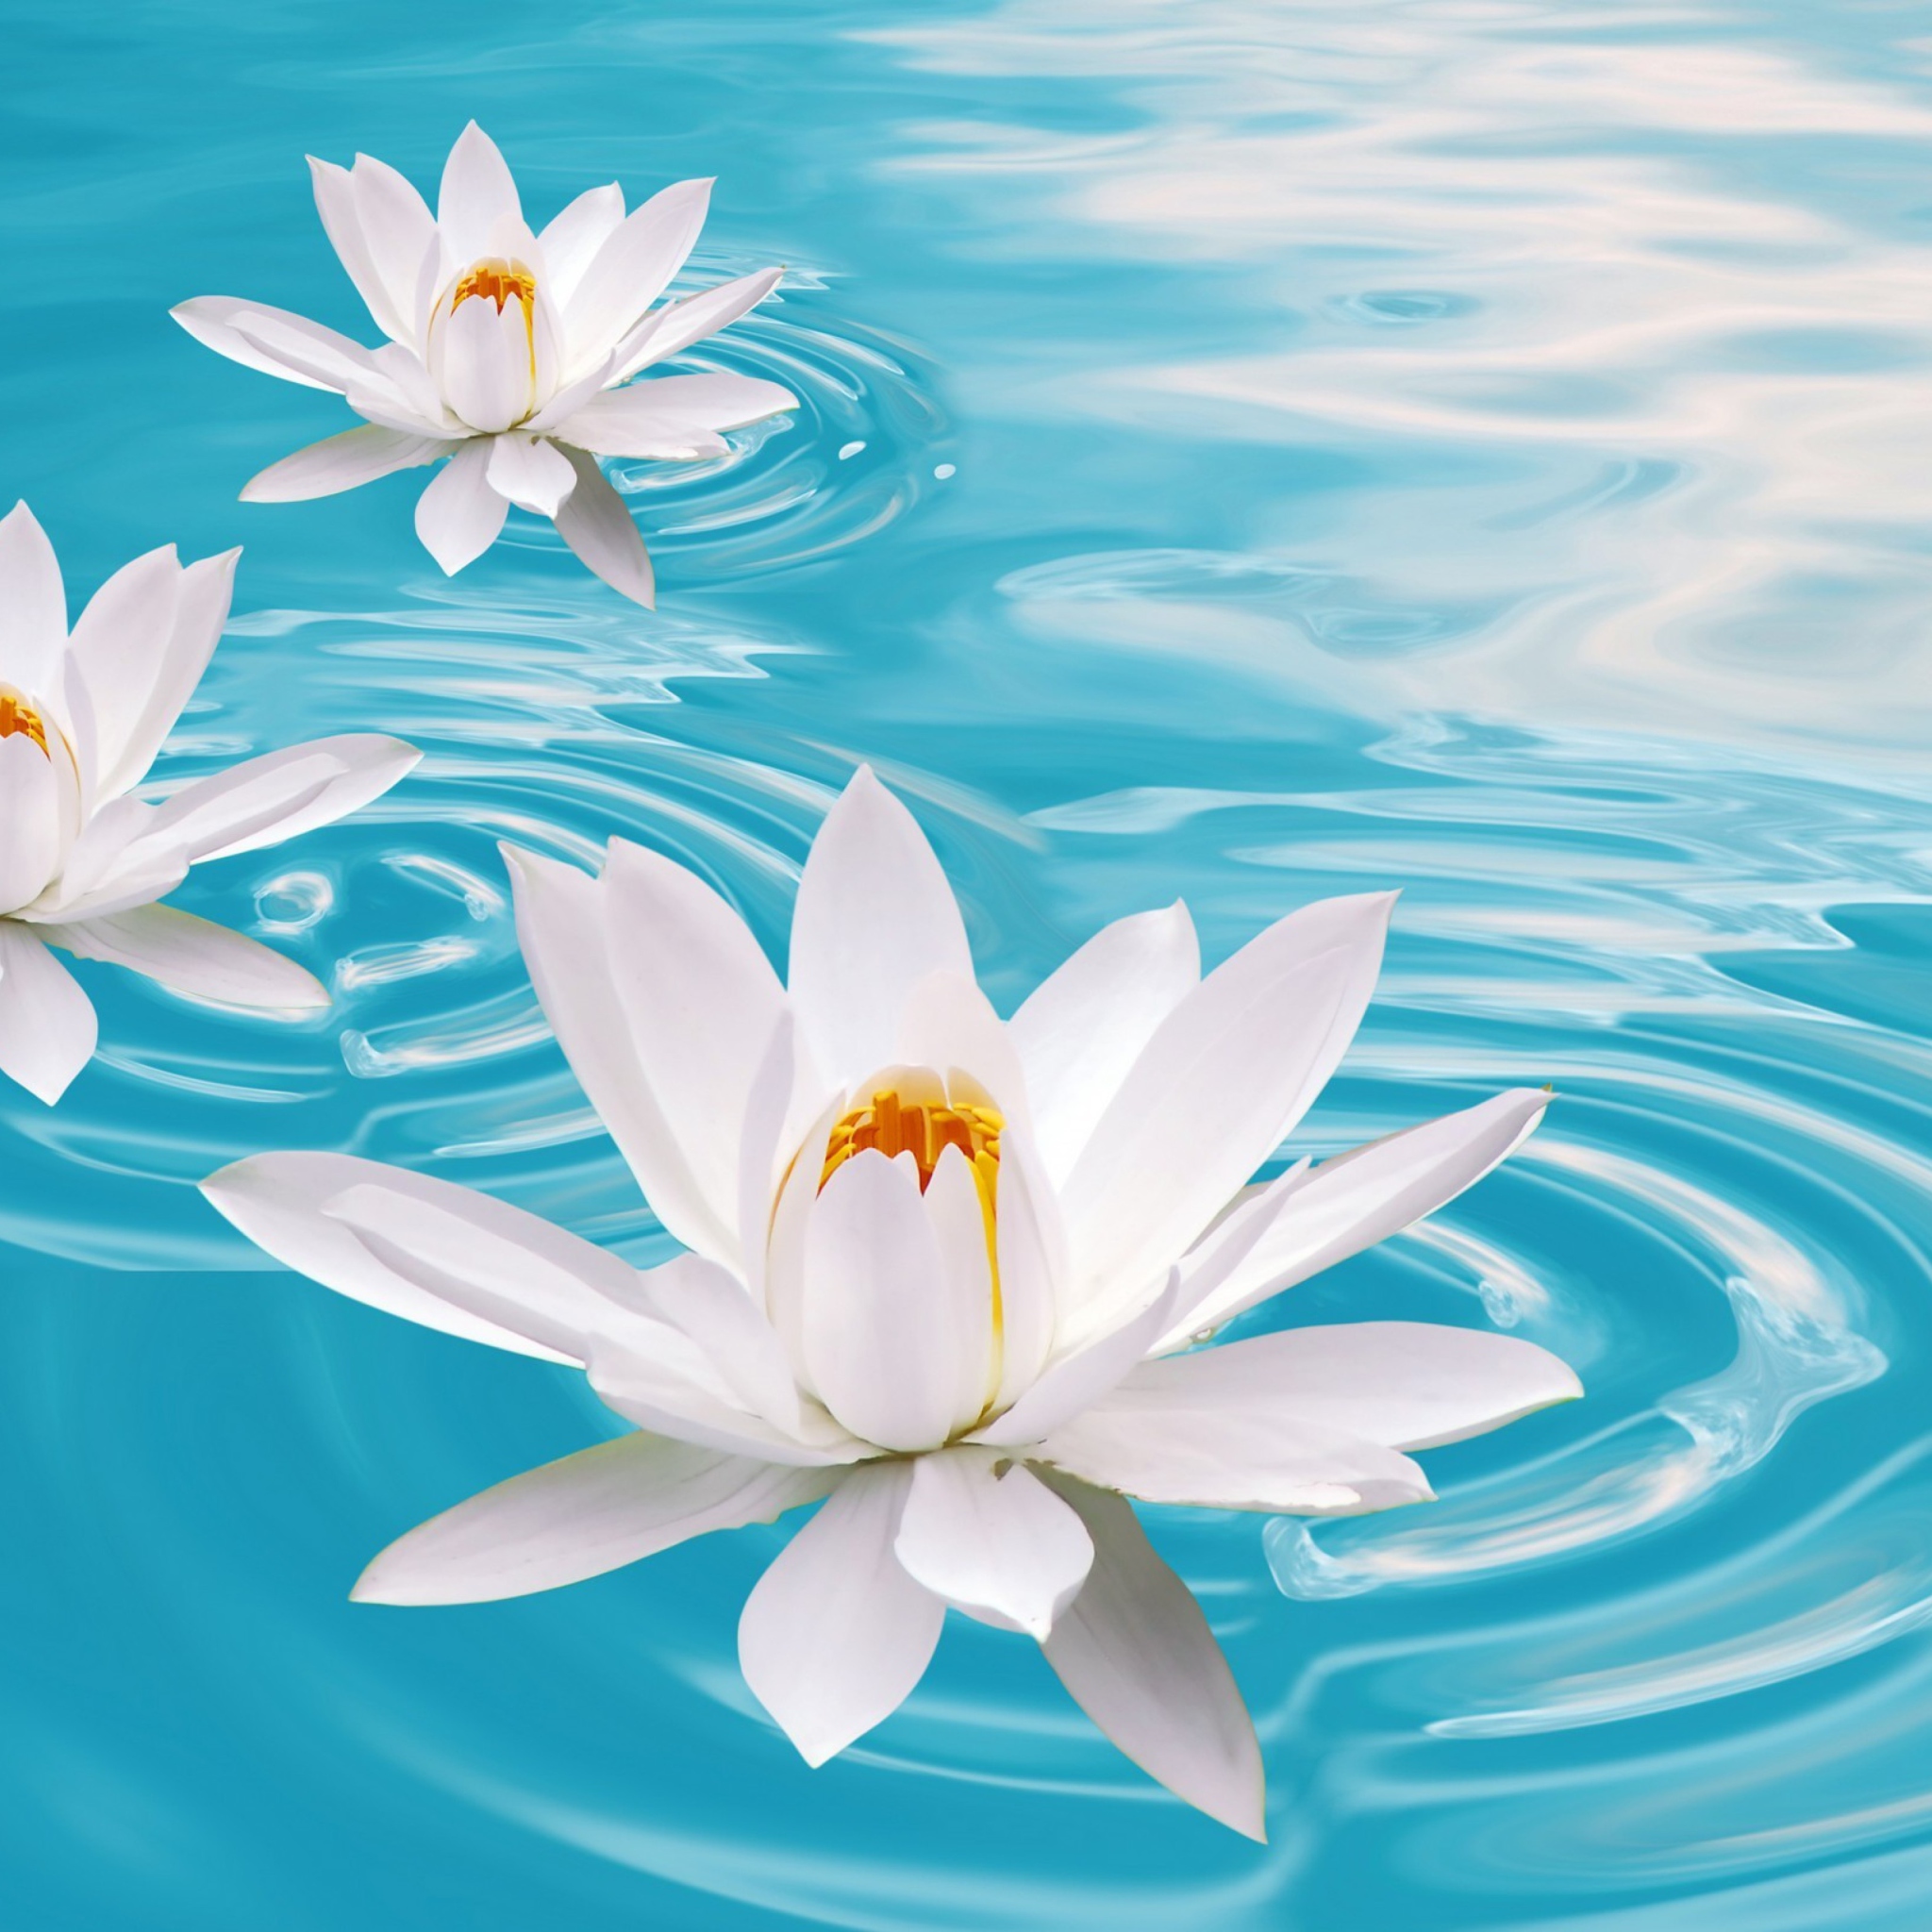 White Lilies And Blue Water wallpaper 2048x2048